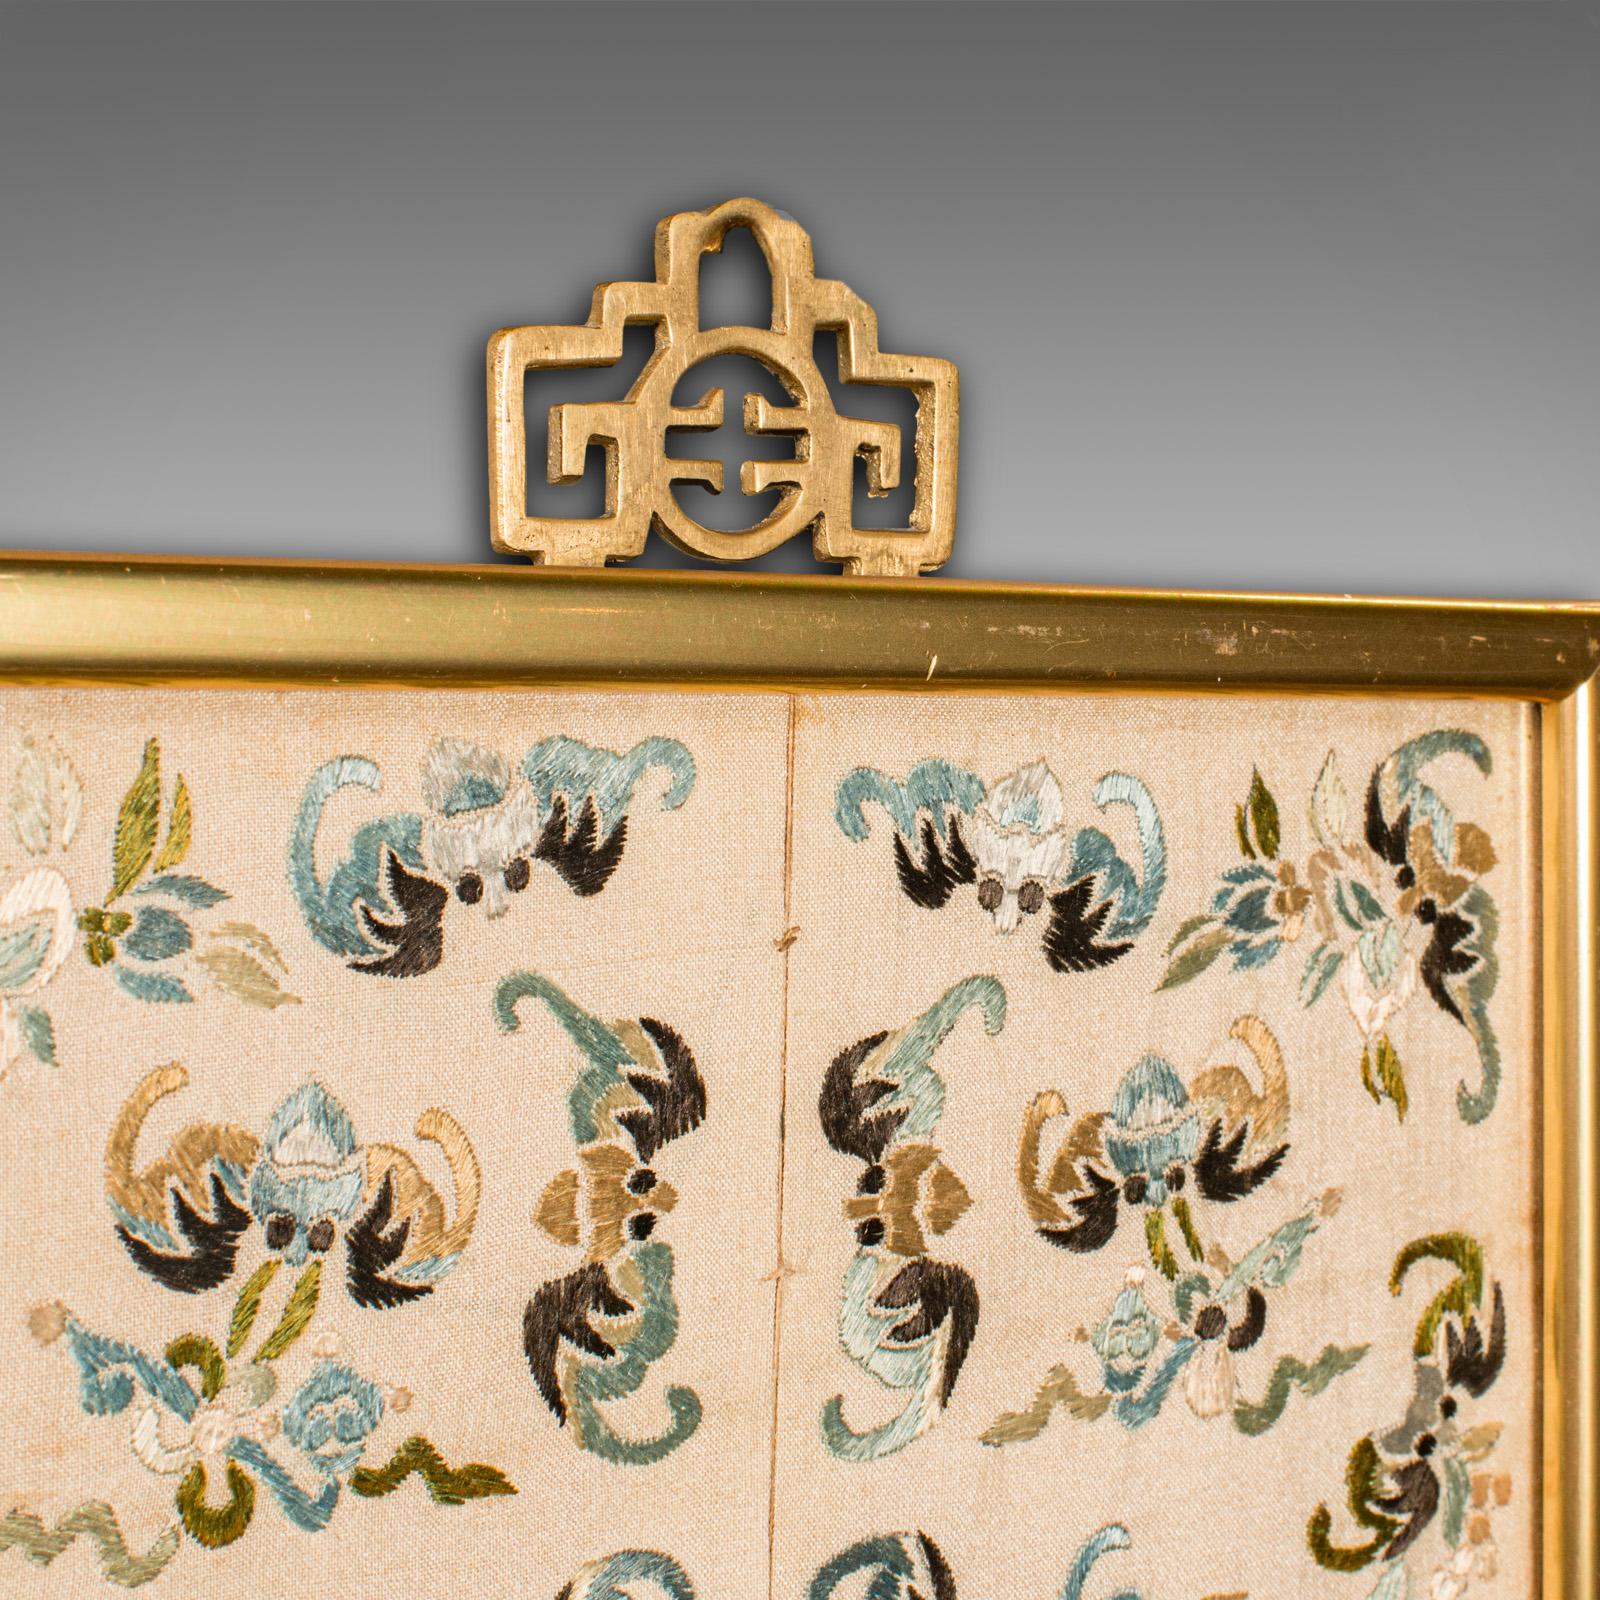 19th Century Antique Decorative Panel, Chinese, Framed, Silk Cotton, Embroidered, Victorian